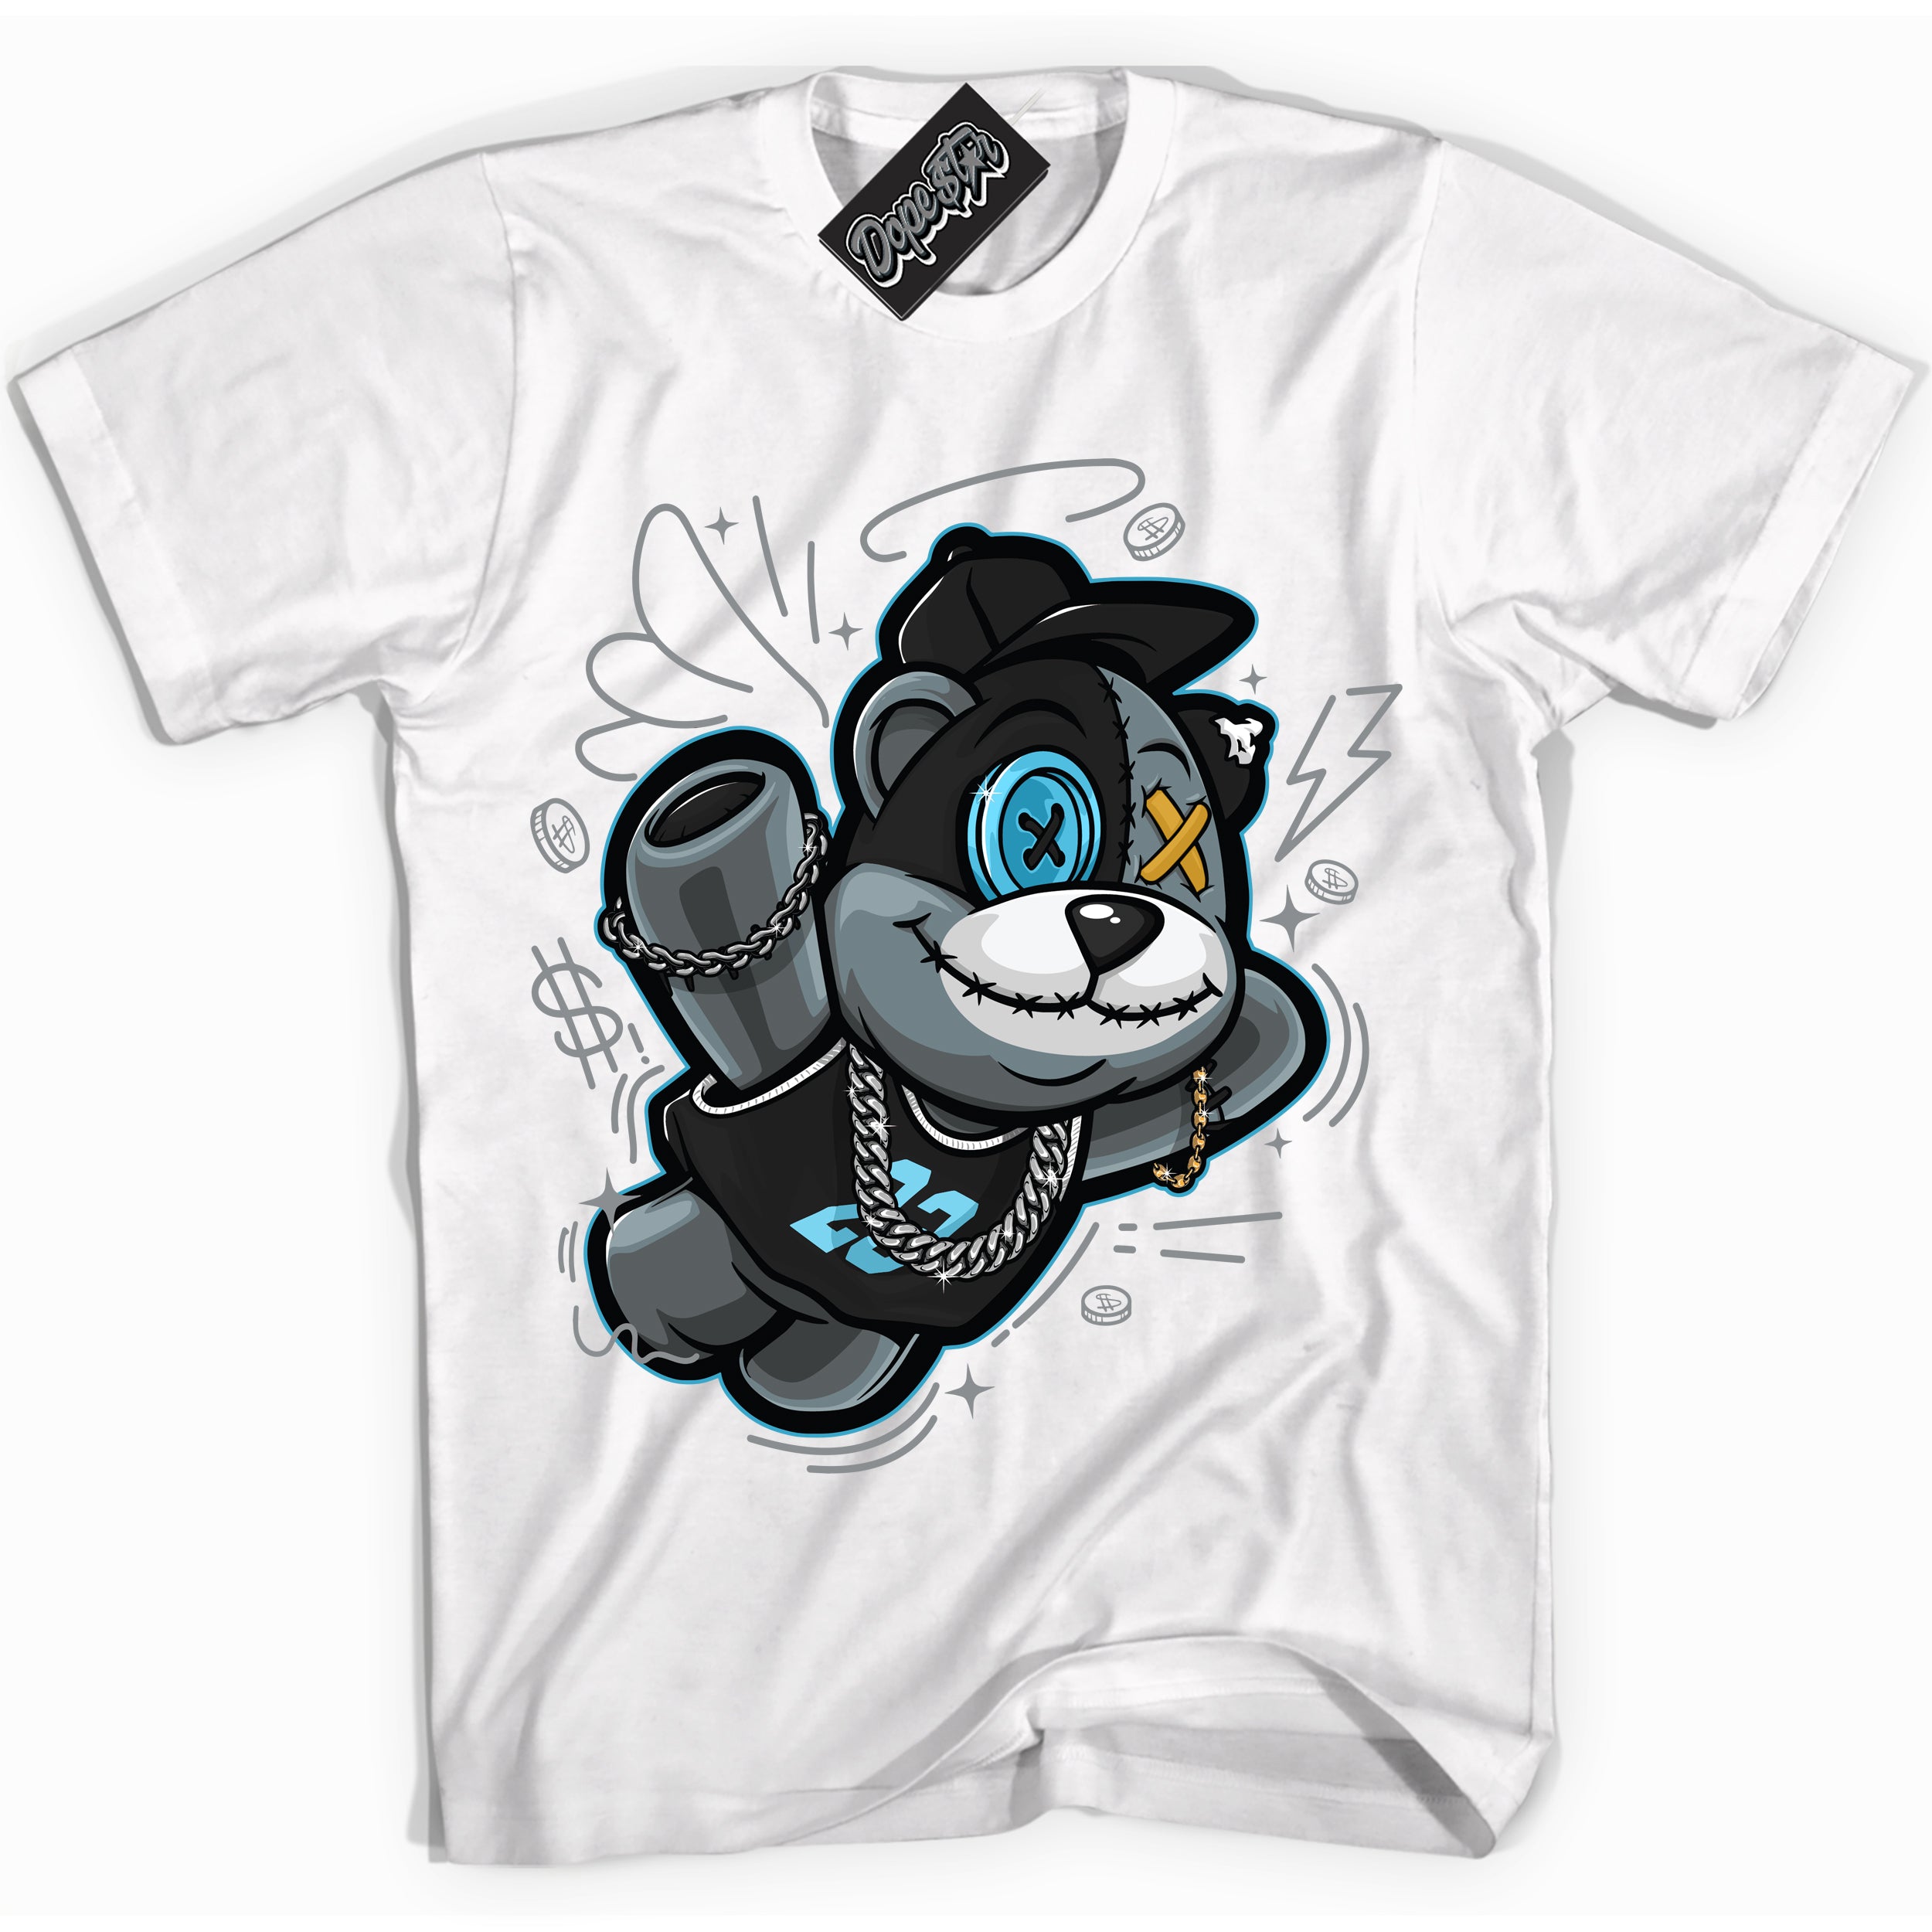 Cool White Shirt with “ Slam Dunk Bear” design that perfectly matches Aqua 5s Sneakers.